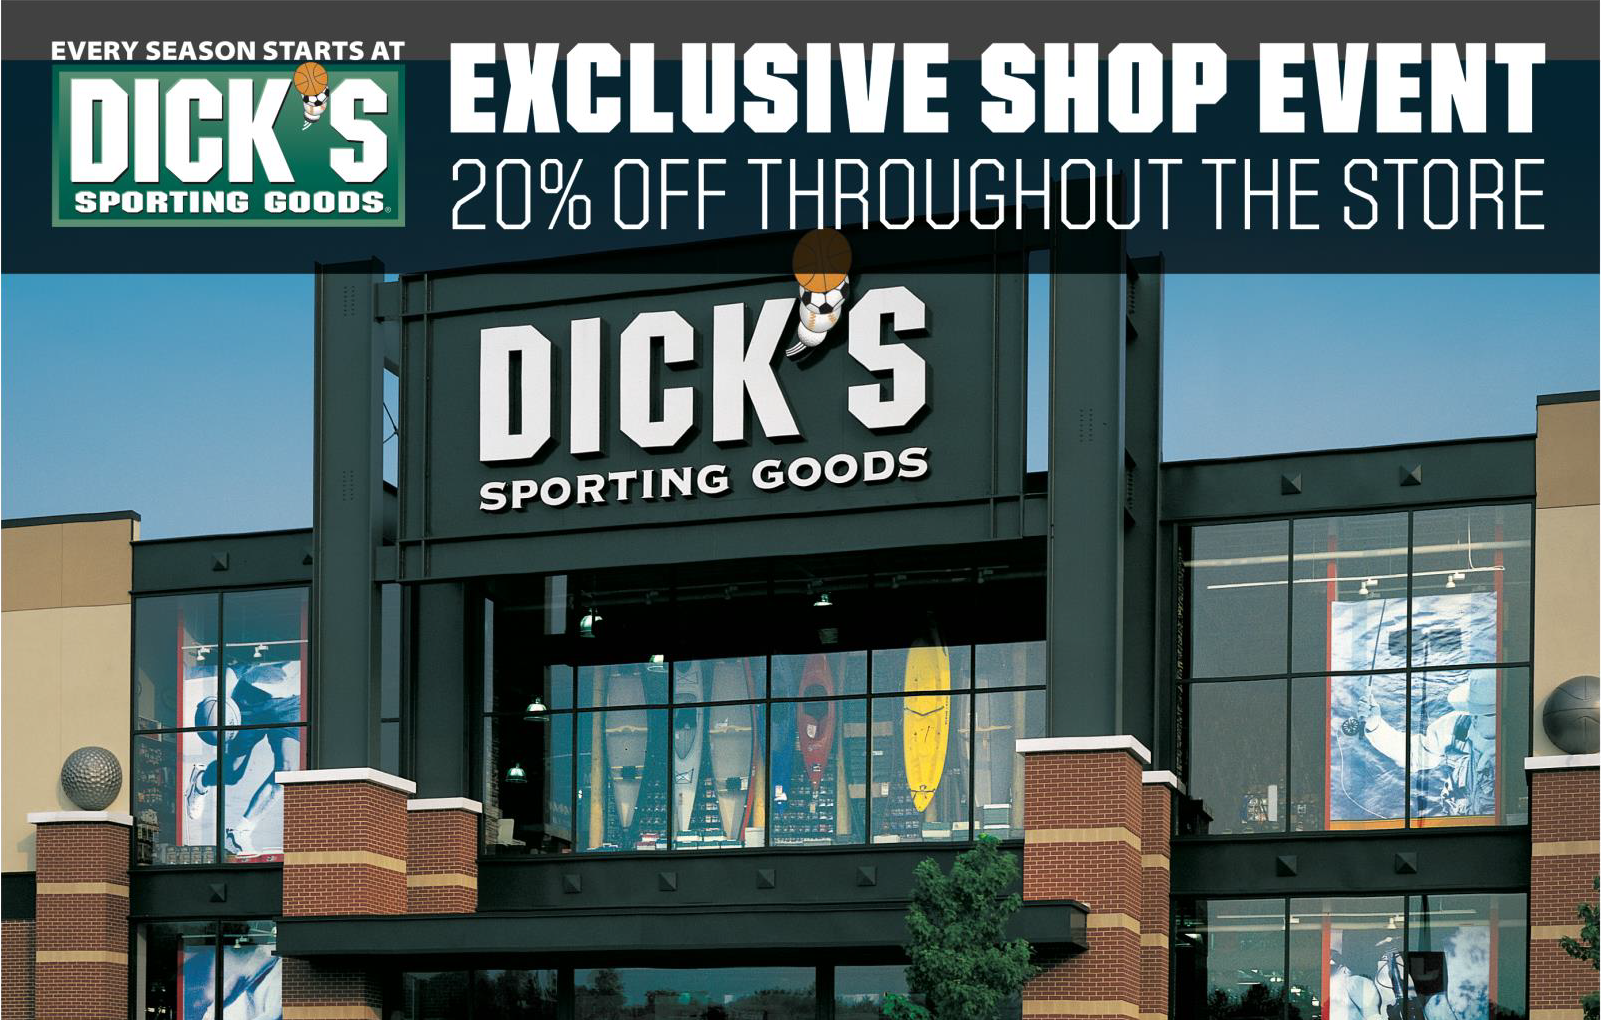 What are dicks sporting goods hours like